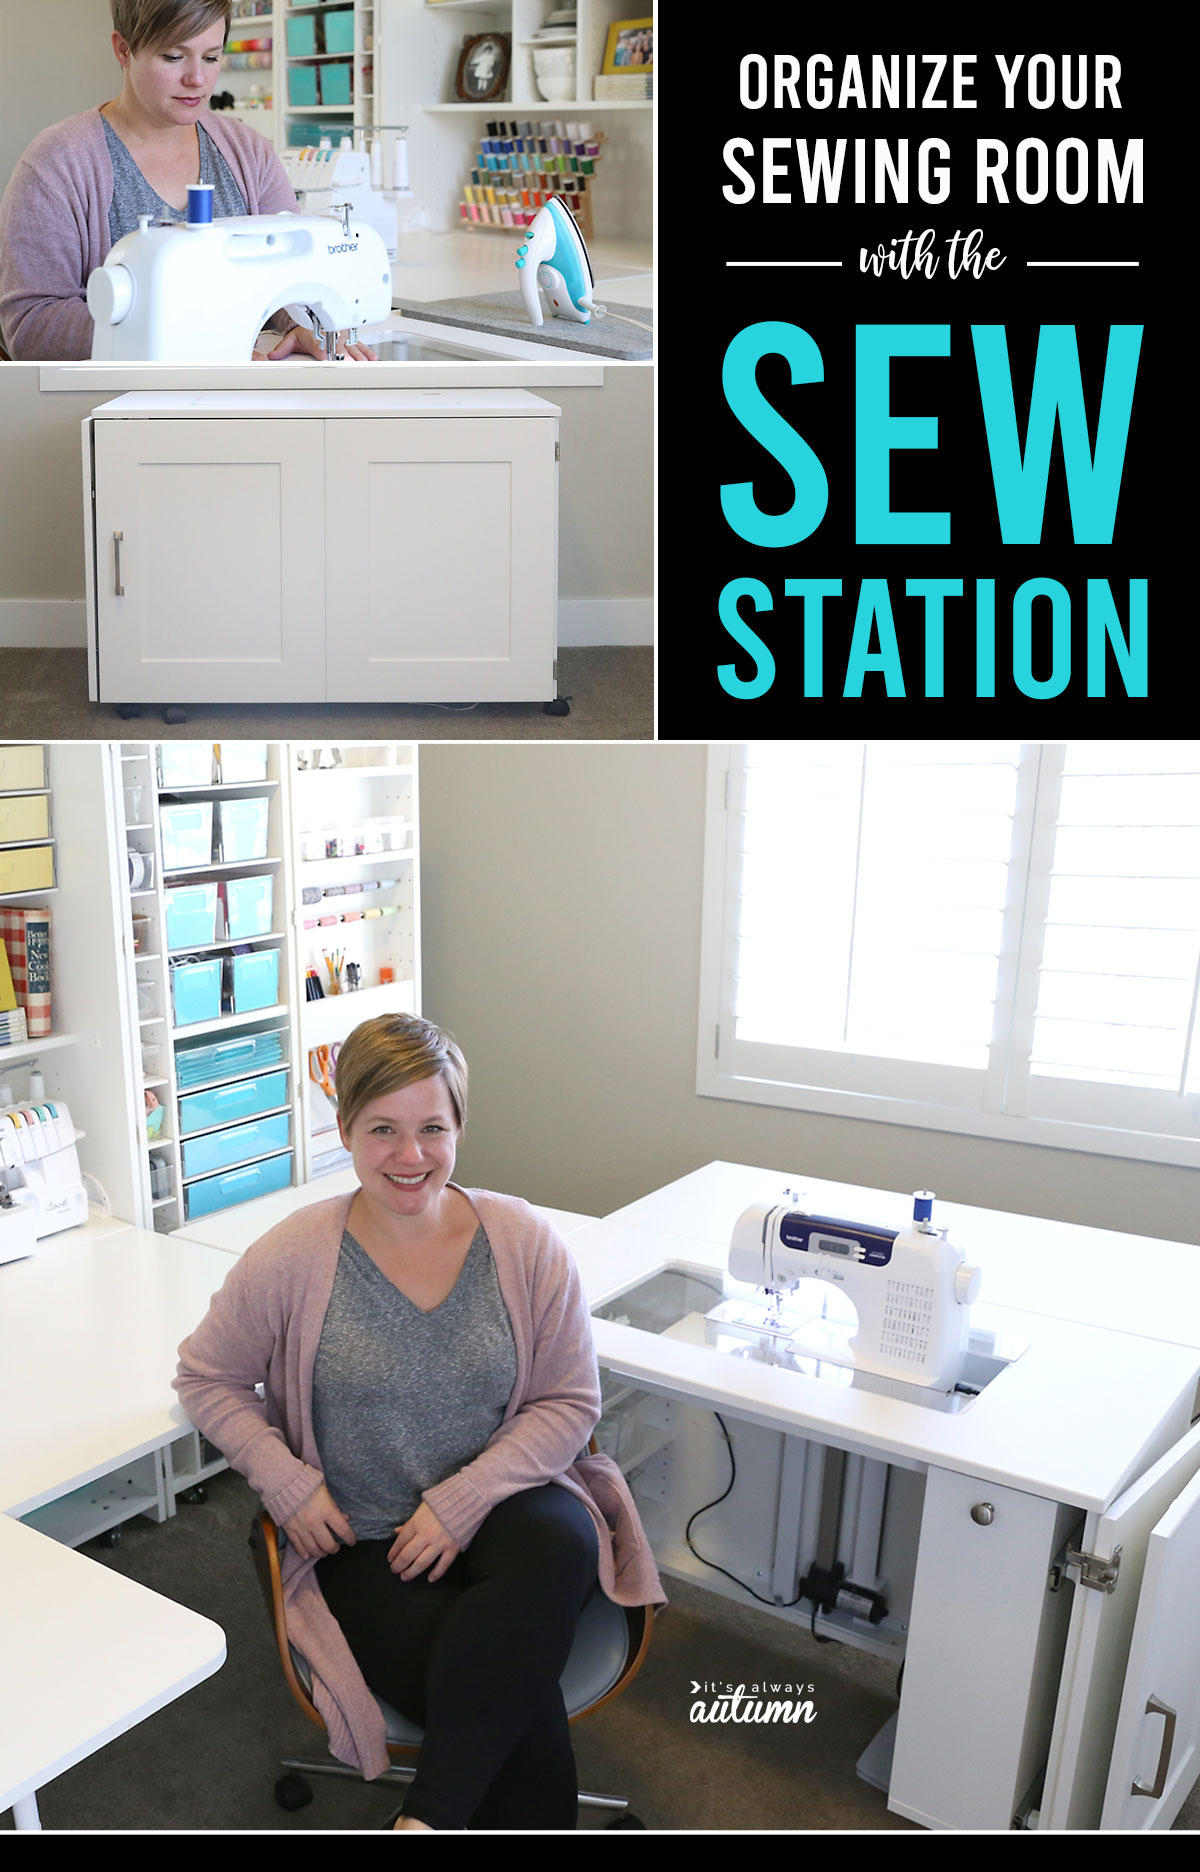 I'm thinking about getting a DreamBox with Sewing Station and DreamCart.  Good idea? (Sorry if not allowed) : r/sewing